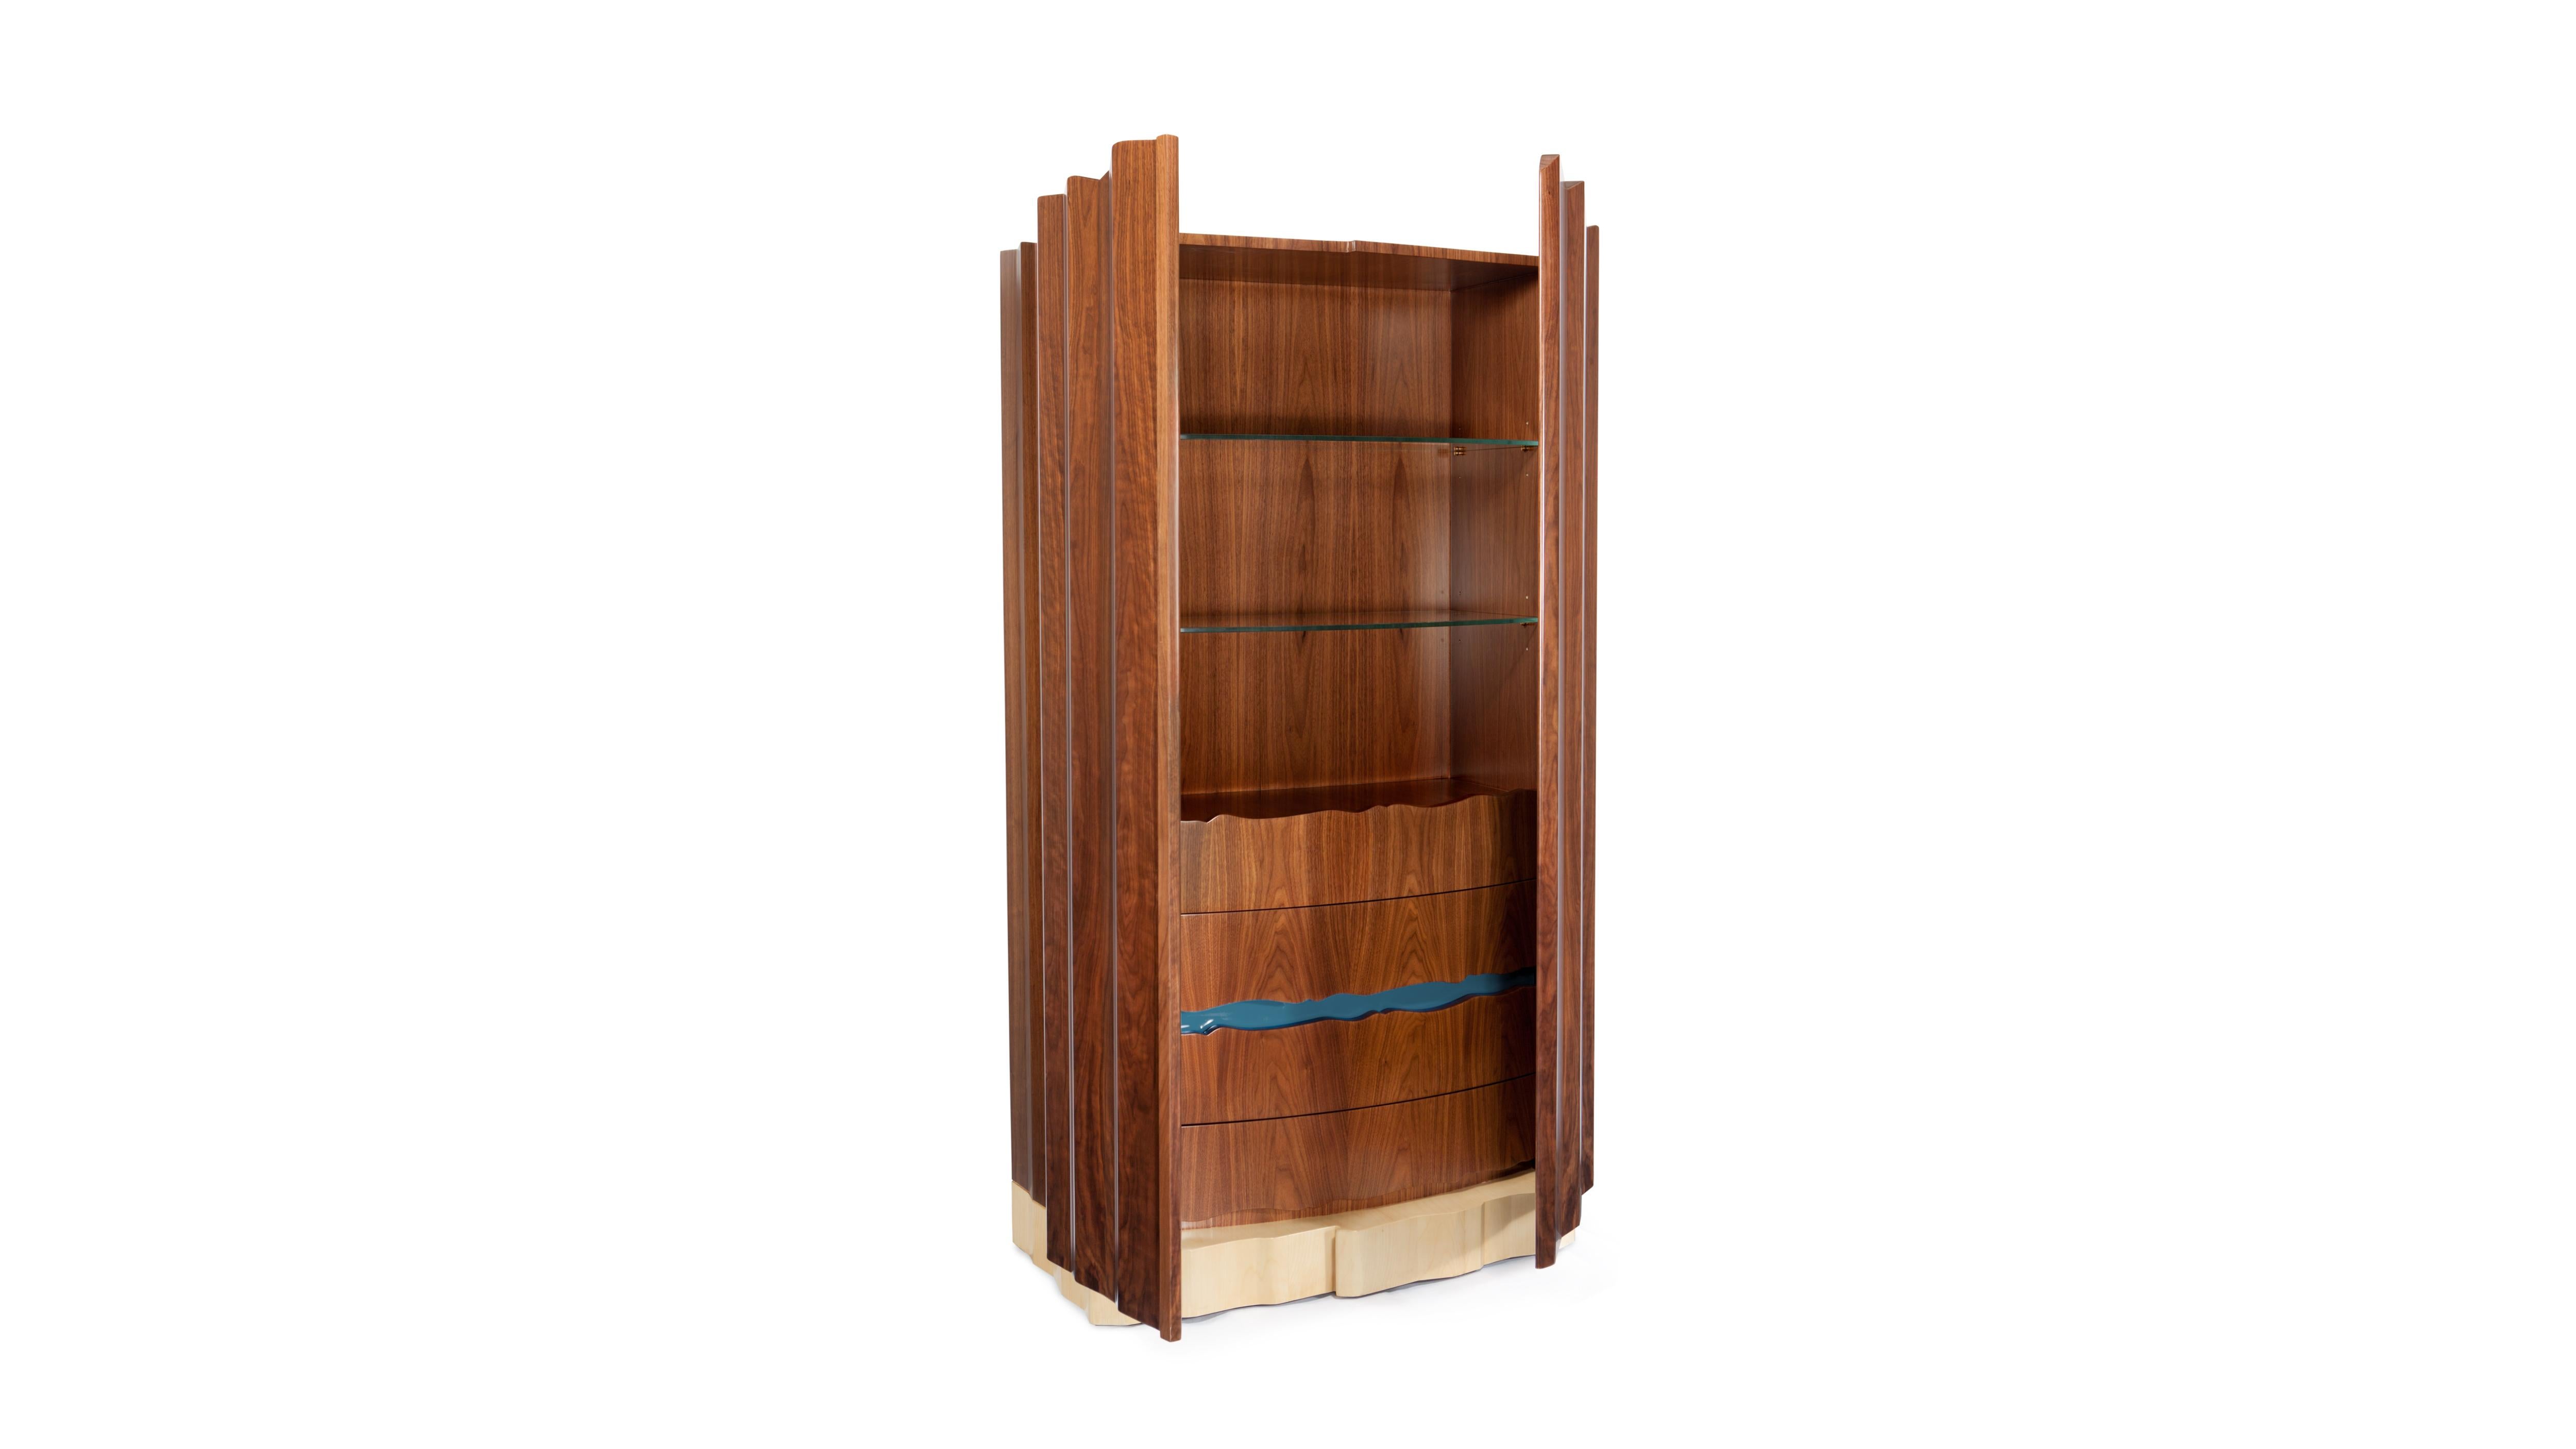 Navajo Canyon Cabinet by InsidherLand
Dimensions: D 54 x W 100 x H 200 cm.
Materials: 
Wooden structure: walnut and sycamore veneers. Drawers: opening detail and interior lacquered in Ref. Colorado Blue. Shelves: glass.
120 kg.

The cabinet Navajo